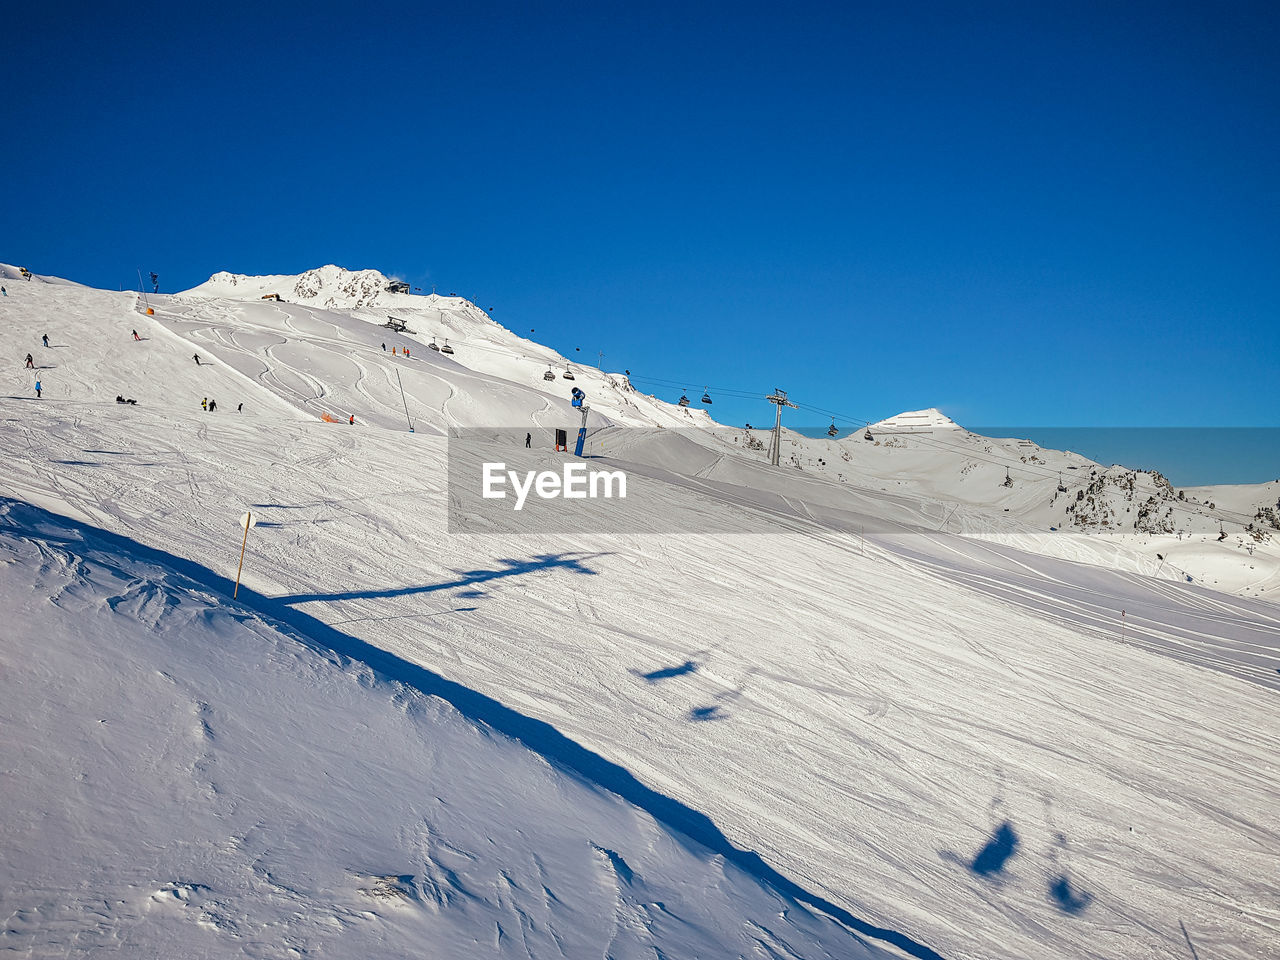 SCENIC VIEW OF SNOWCAPPED MOUNTAIN AGAINST CLEAR BLUE SKY